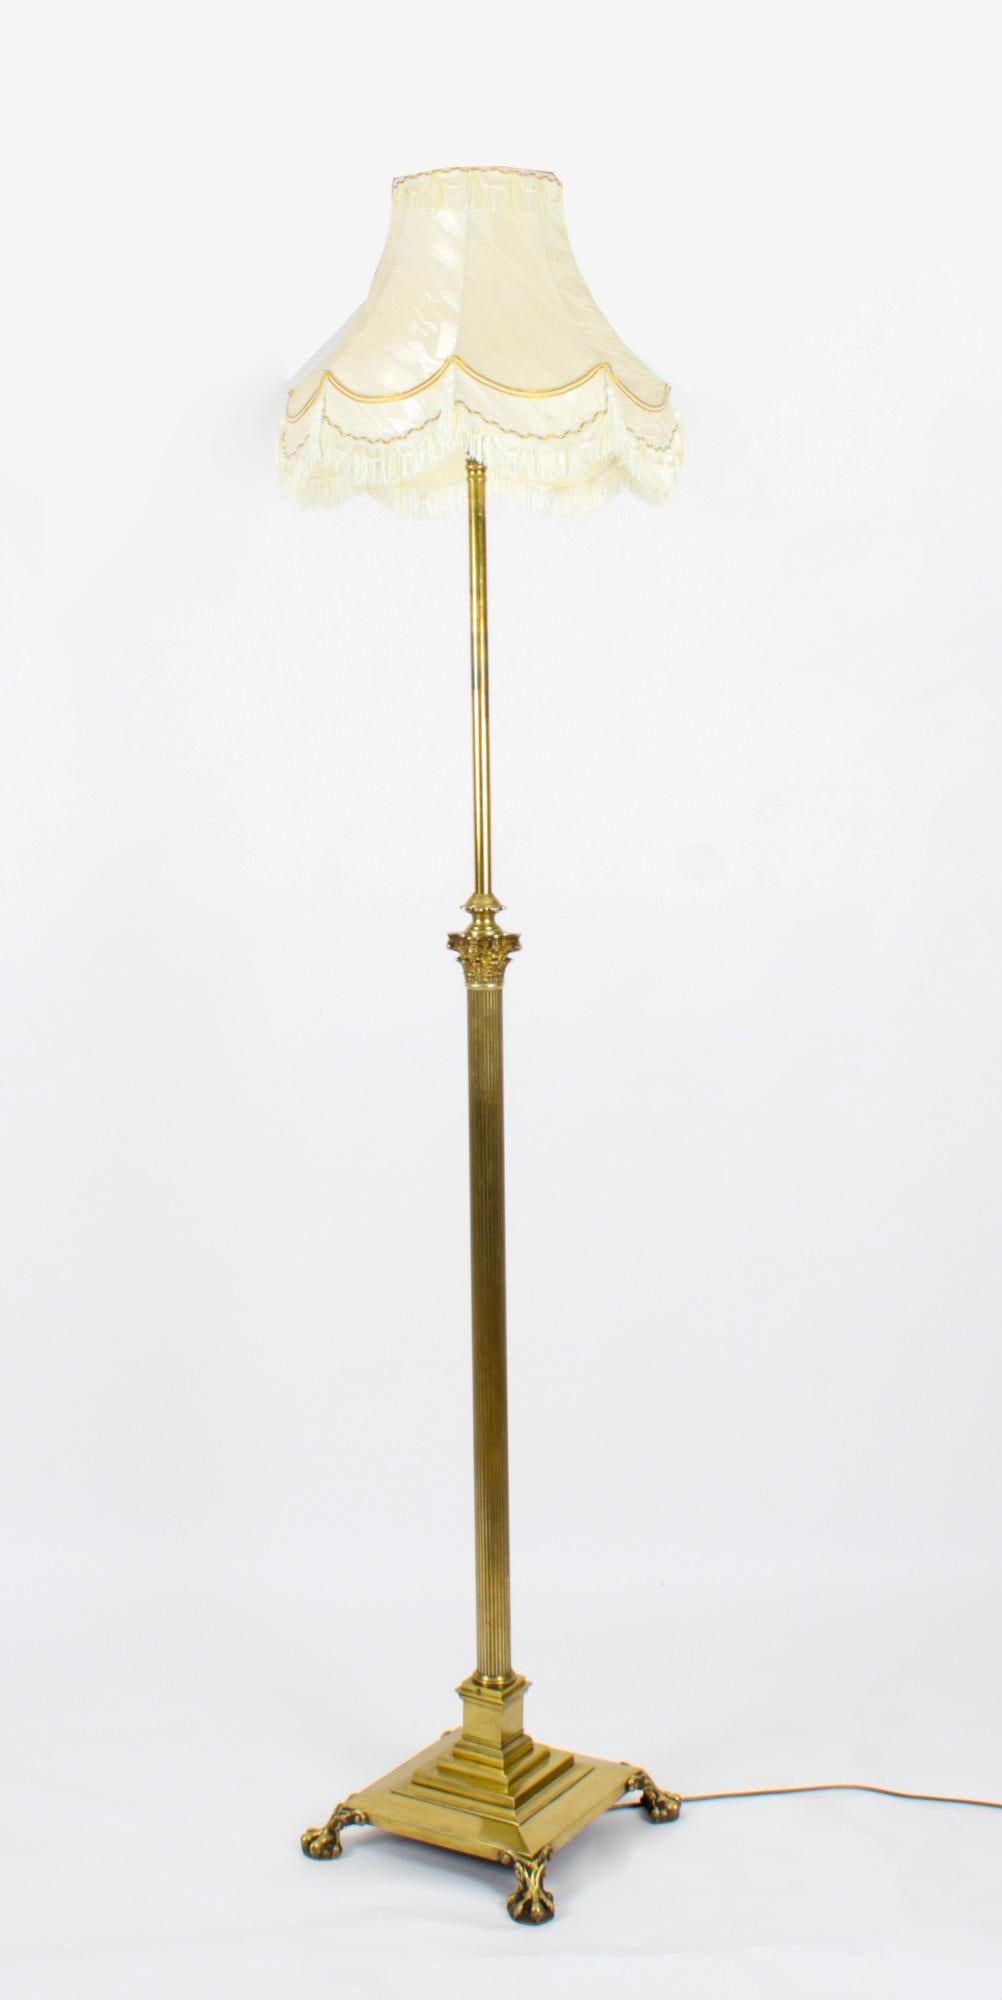 This is a highly attractive and exhibition quality antique Victorian Corinthian column design brass telescopic floor standard lamp now converted to electricity, circa 1890 in date.

This splendid lamp features a distinguished Corinthian capital